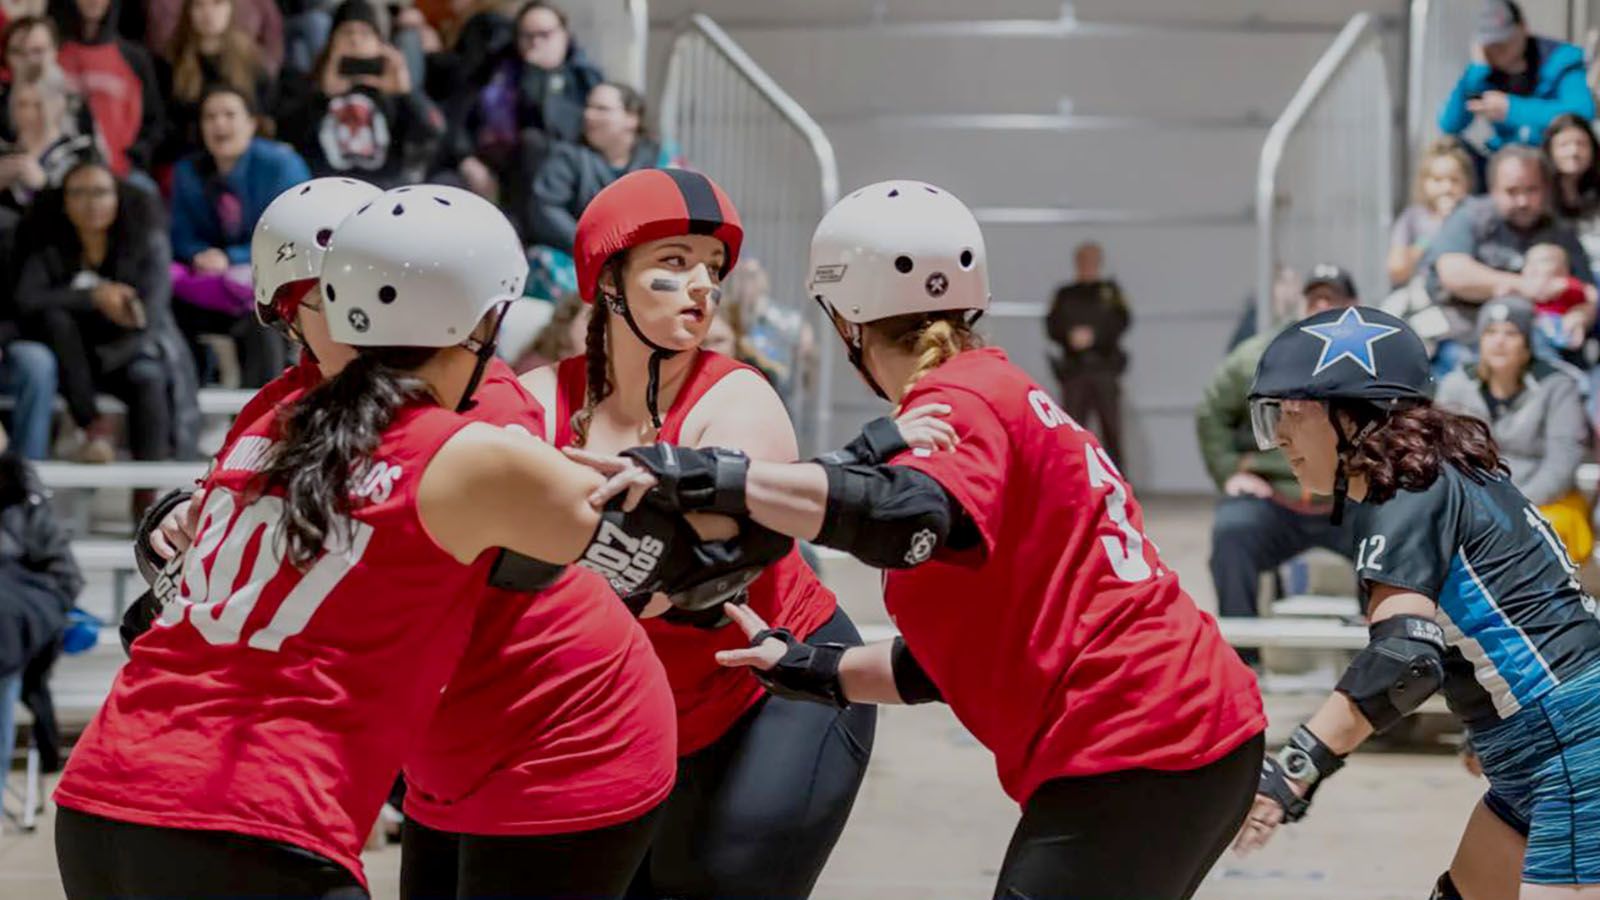 The Fort Wayne Roller Derby returns to the oval on April 23.